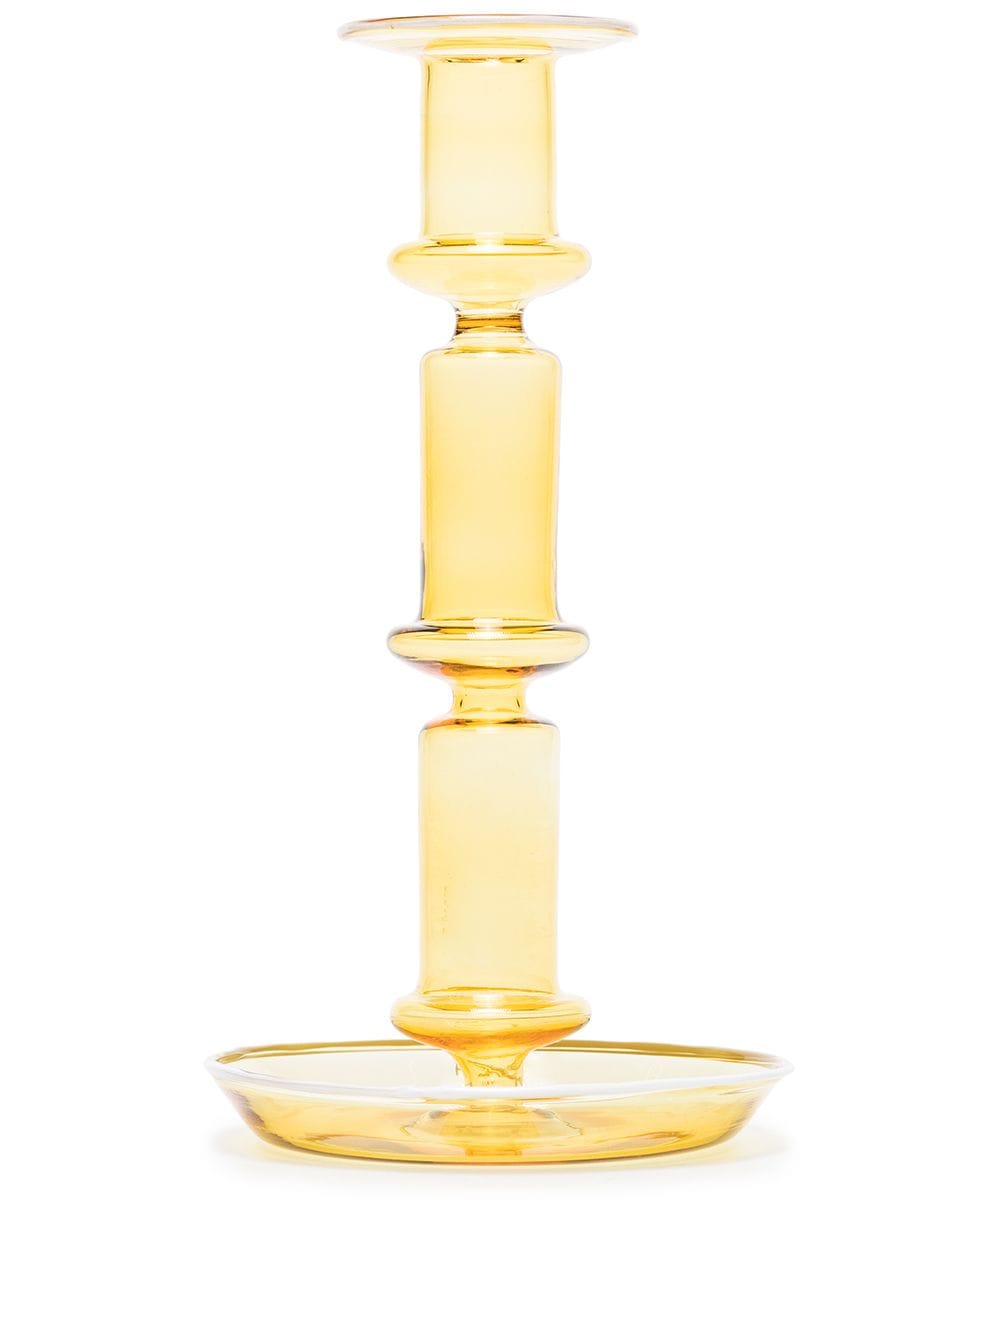 HAY Flare Tall glass candleholder - Yellow von HAY